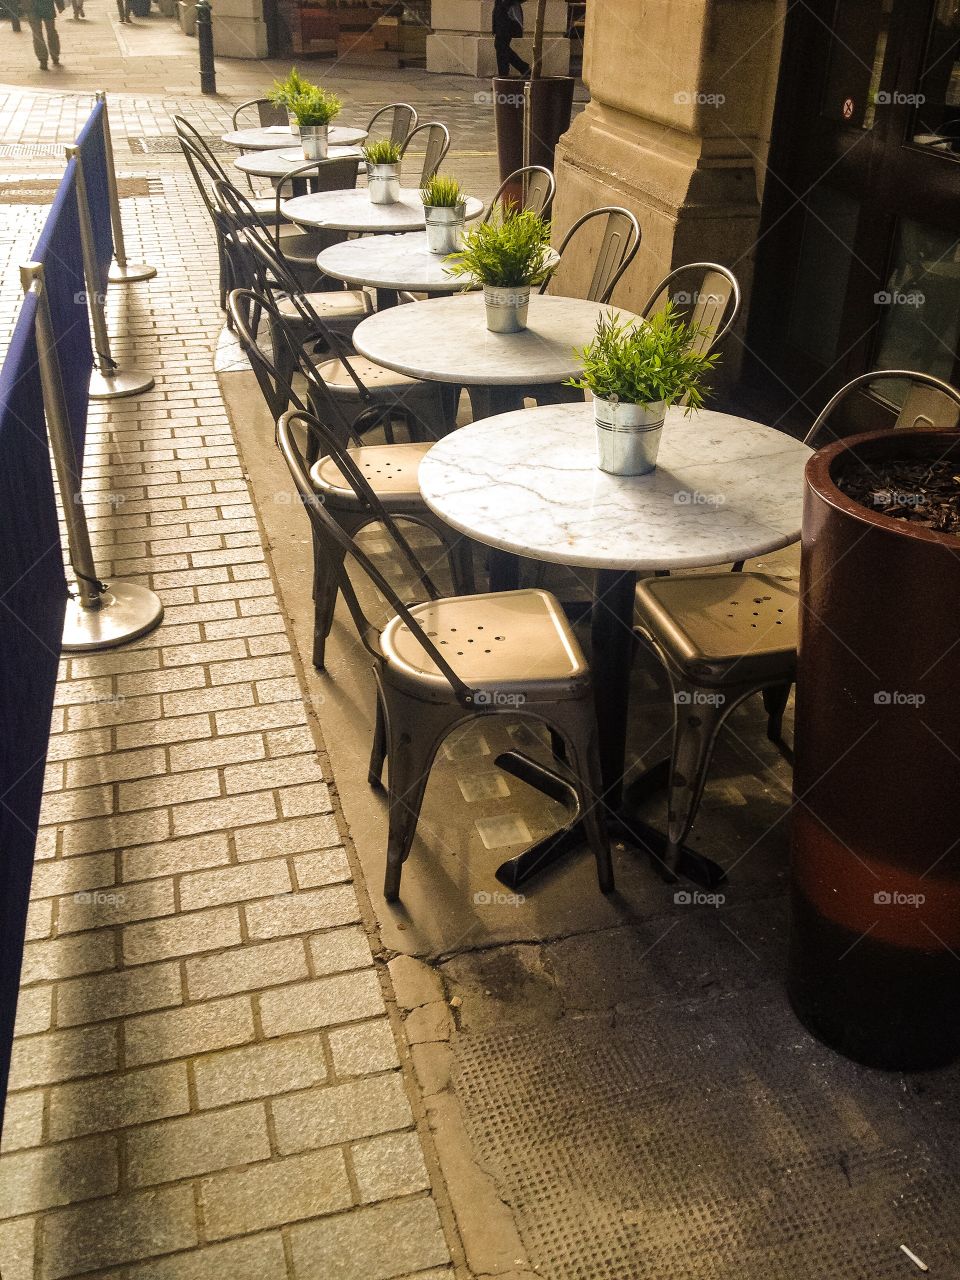 Empty chairs and table at sidewalk cafe